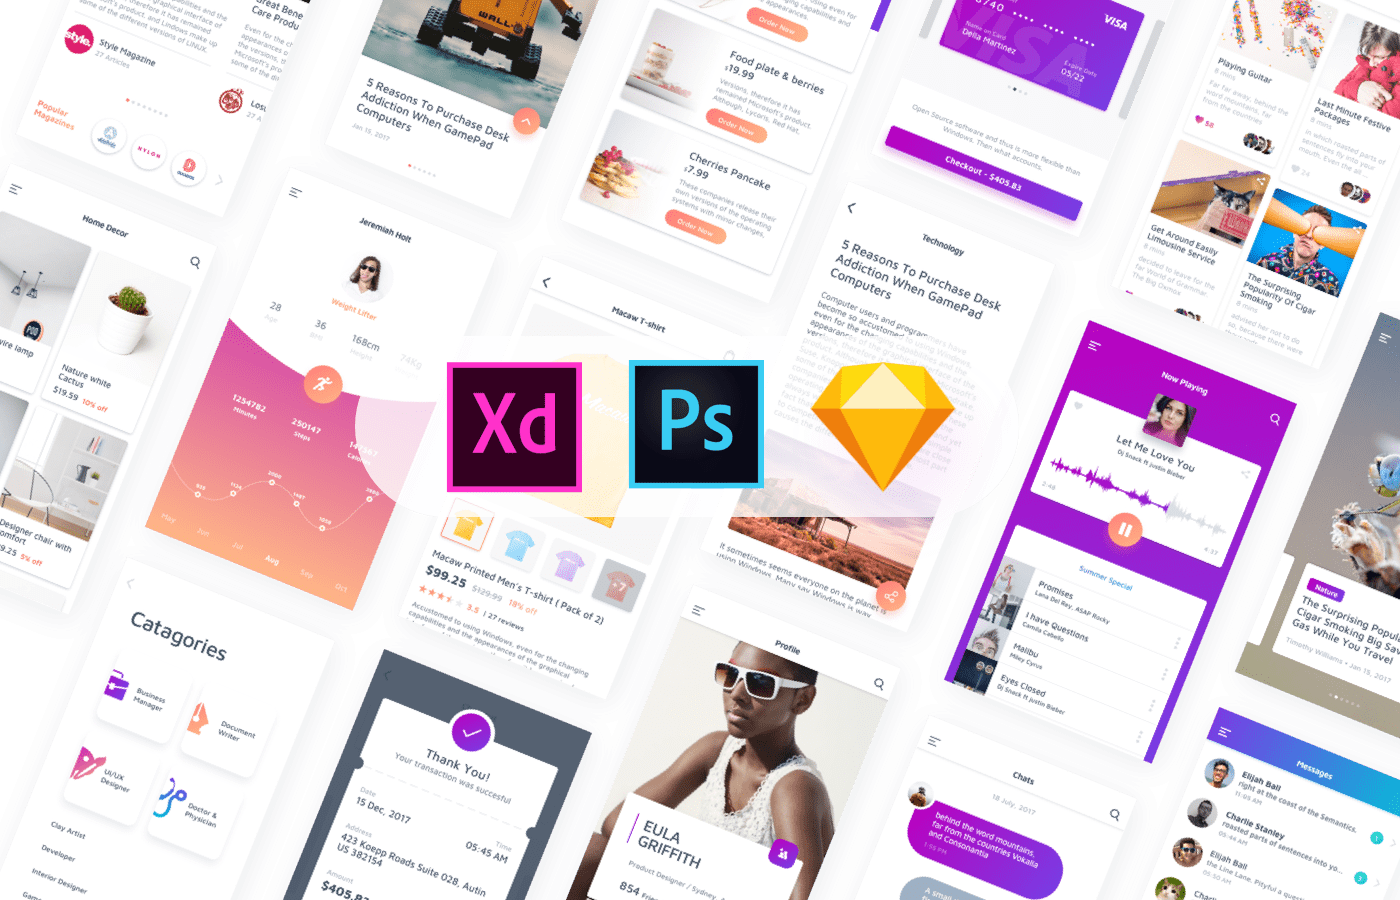 Do A Beautiful Ui For App In Sketch Photoshop Or Xd By Vhoraamir7